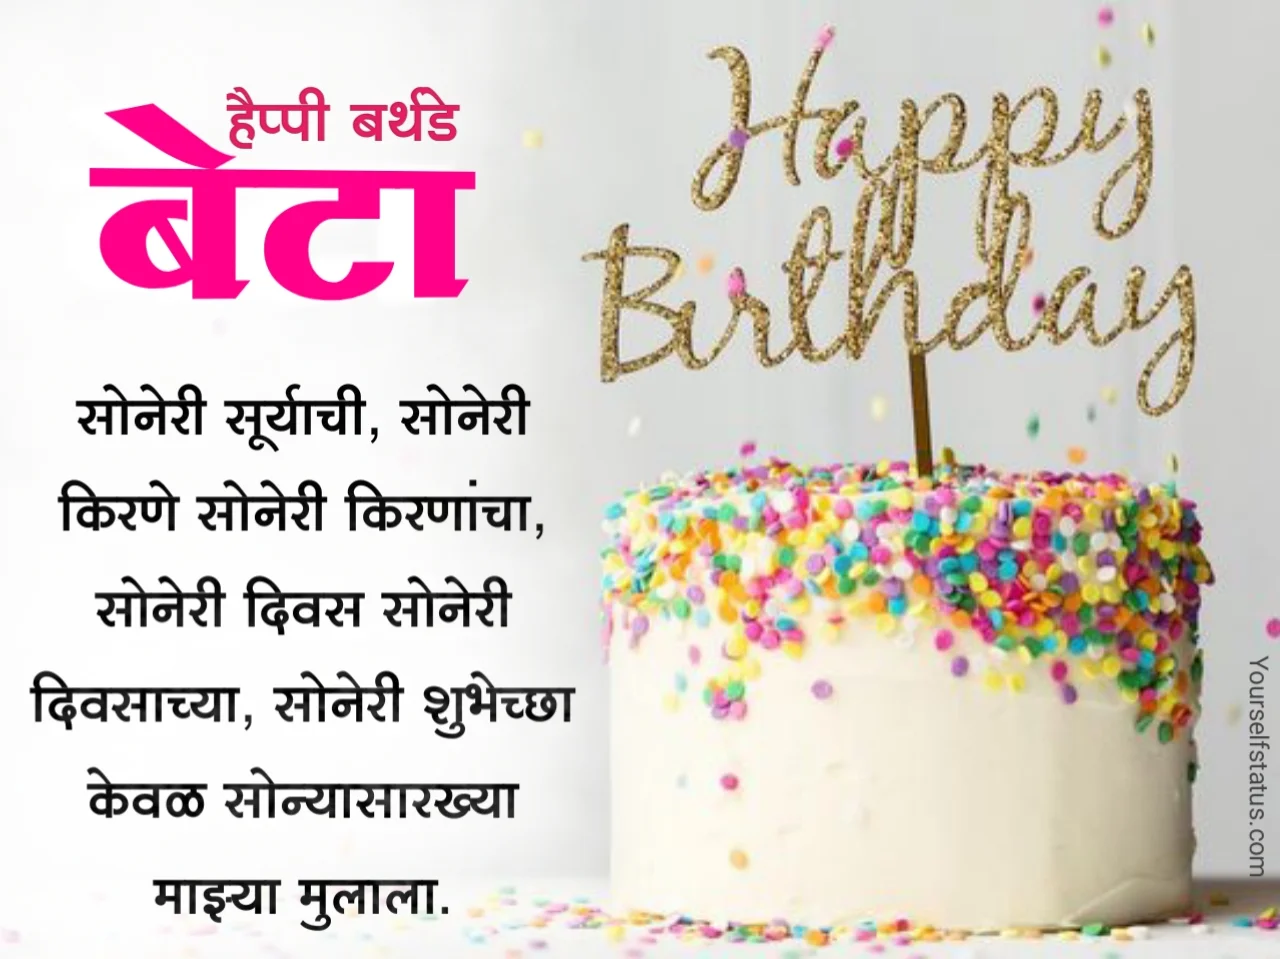 Happy birthday images for son in marathi